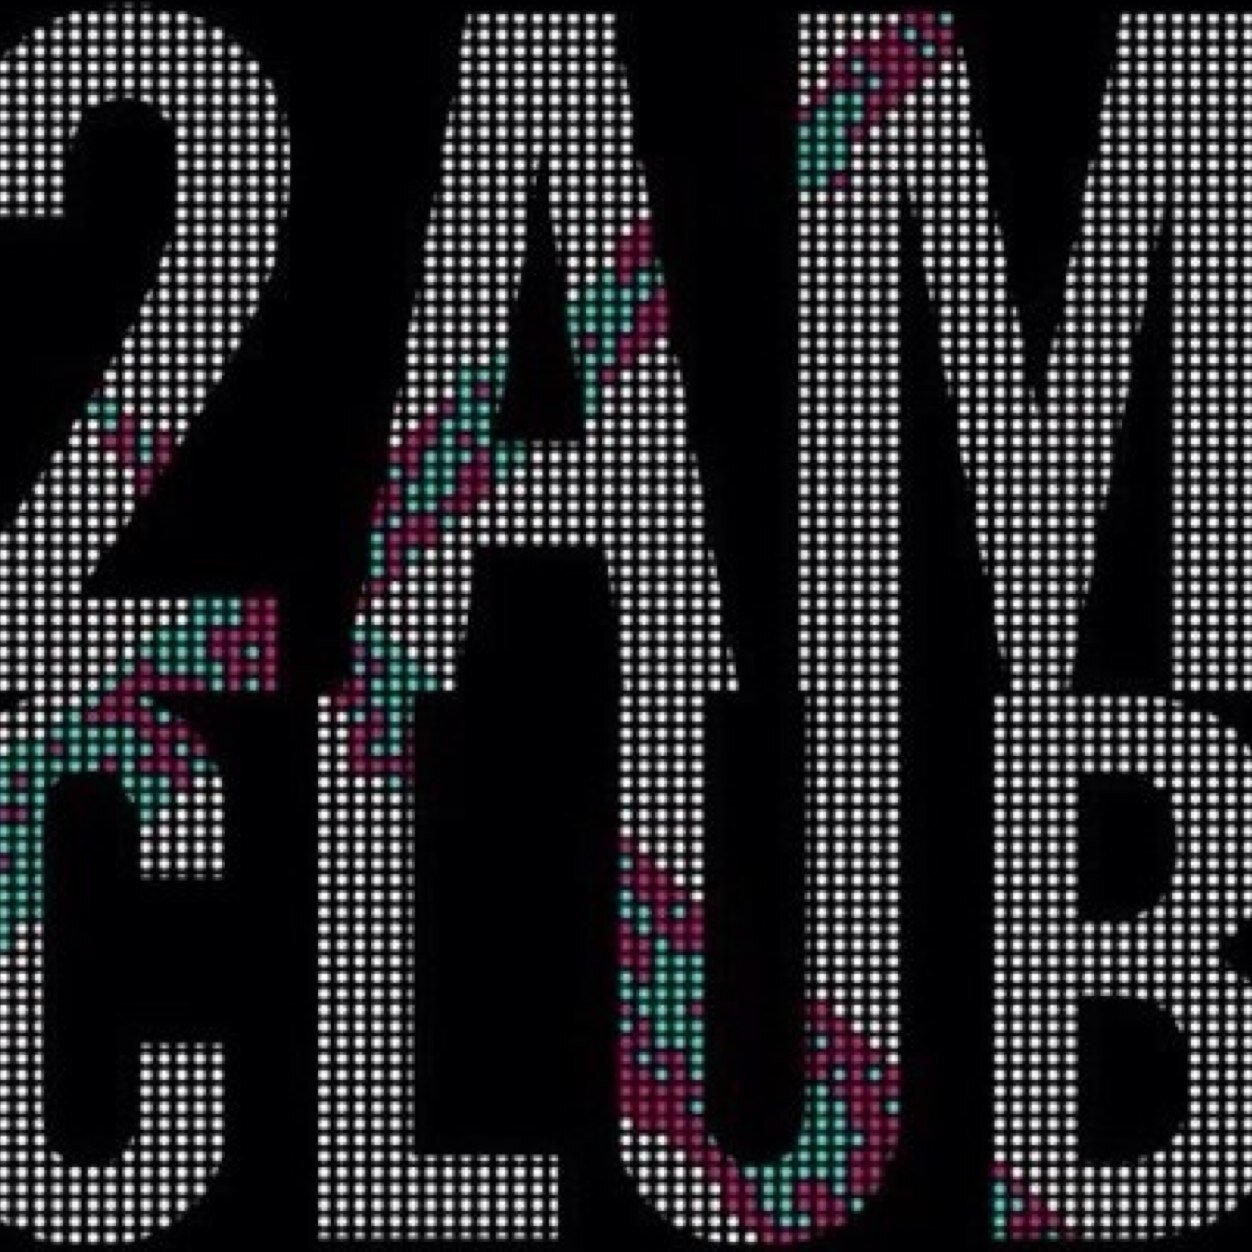 Former band @2amclub team2am. Support the band's individual projects!: @tylerxcordy @MARCEBASSY @Mattyreag @HiDaveyD @PatrickJarrett @Sauce2AM @THISIANONEILL